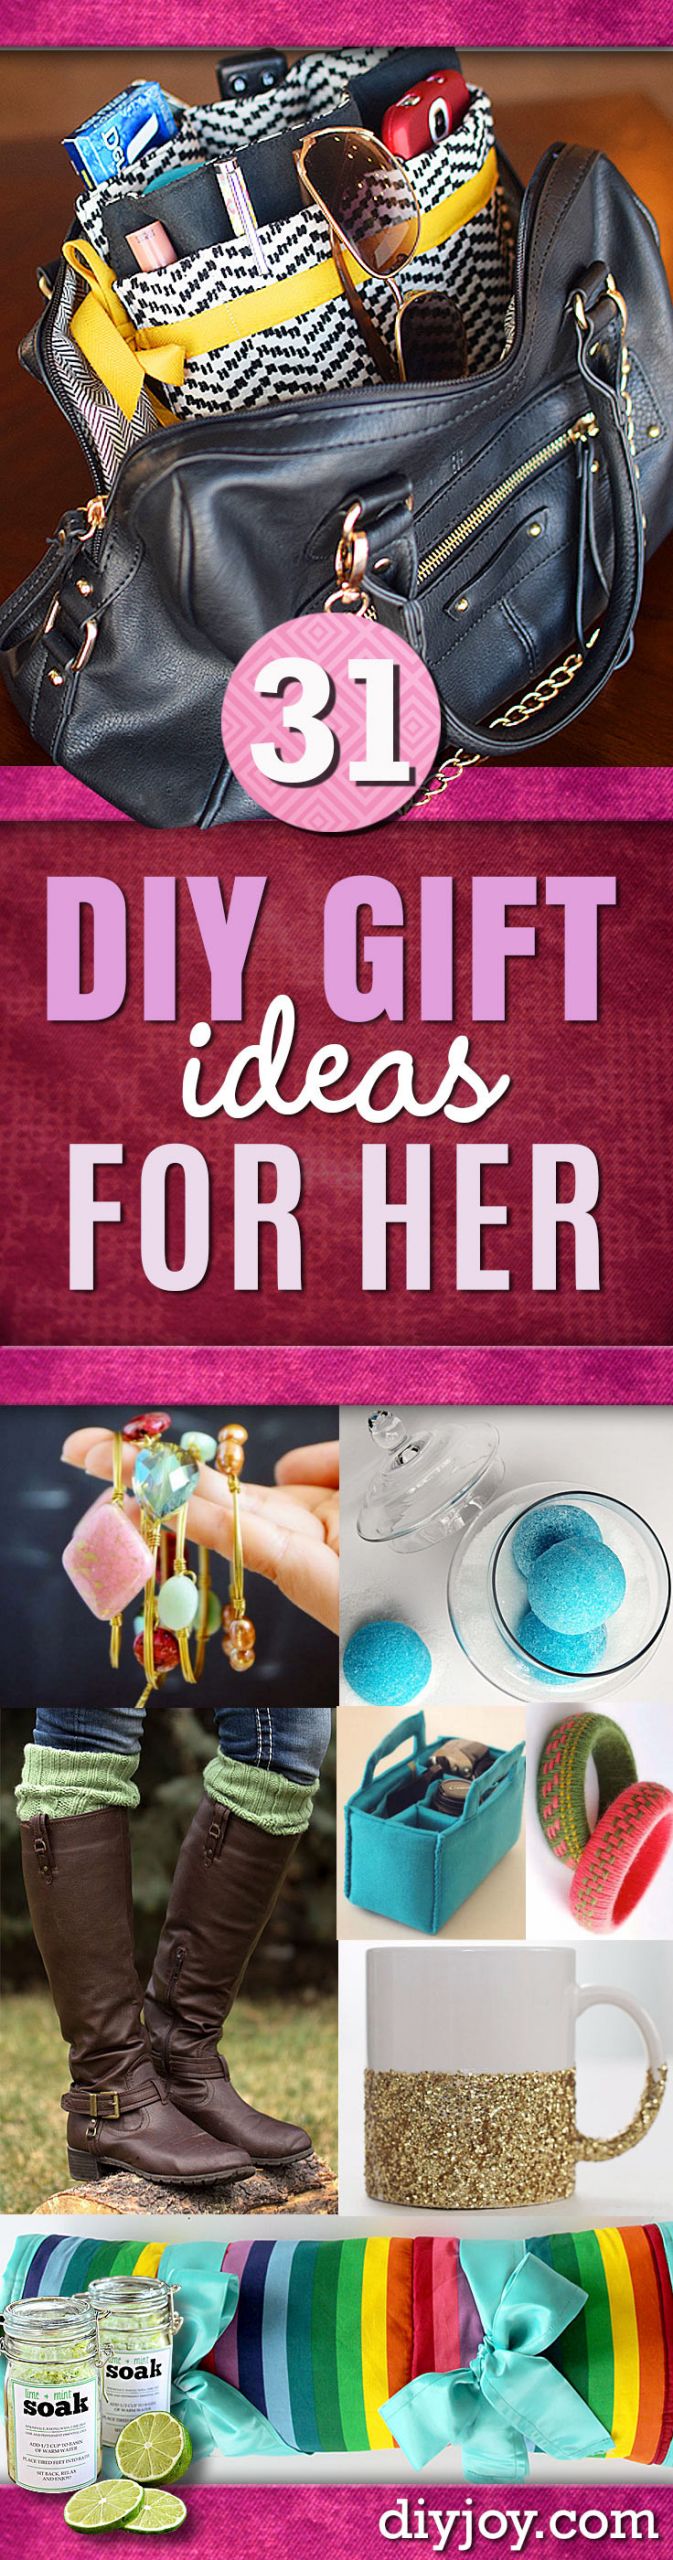 Birthday Gifts For Mom DIY
 DIY Gift Ideas for Her